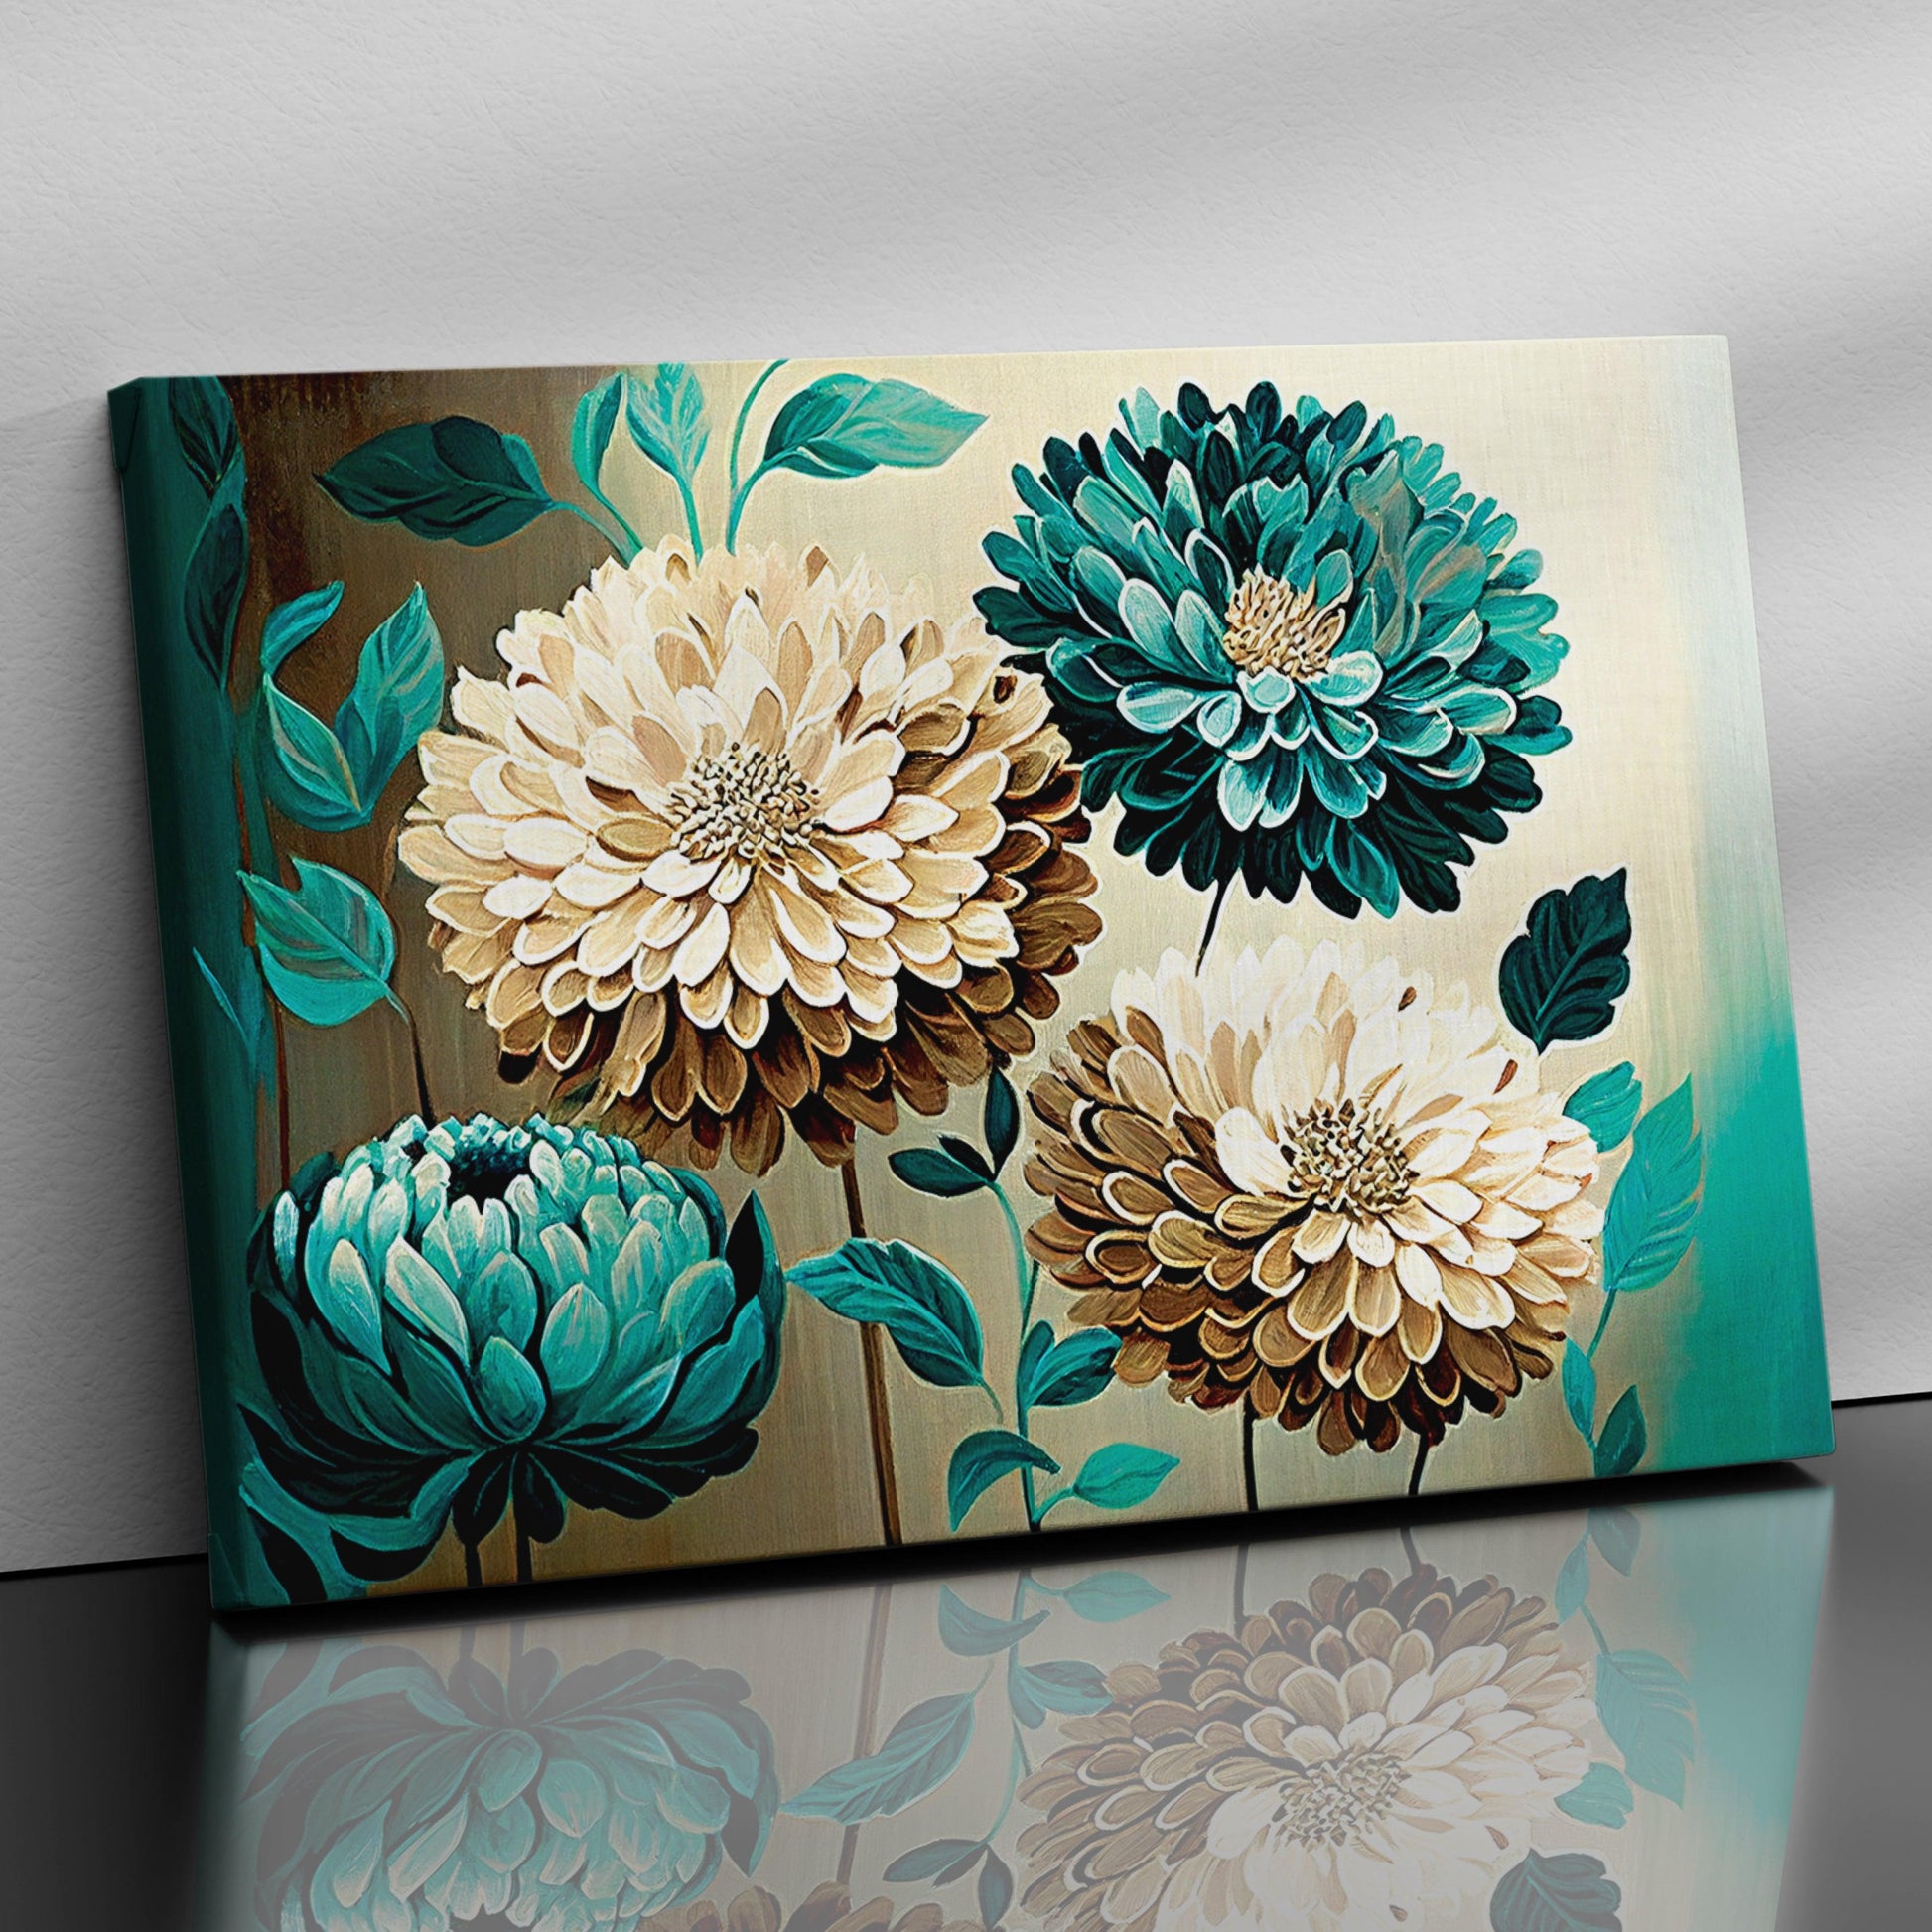 Floral Canvas Painting - Vibrant Large Canvas Art for Wall Decor - Kotart